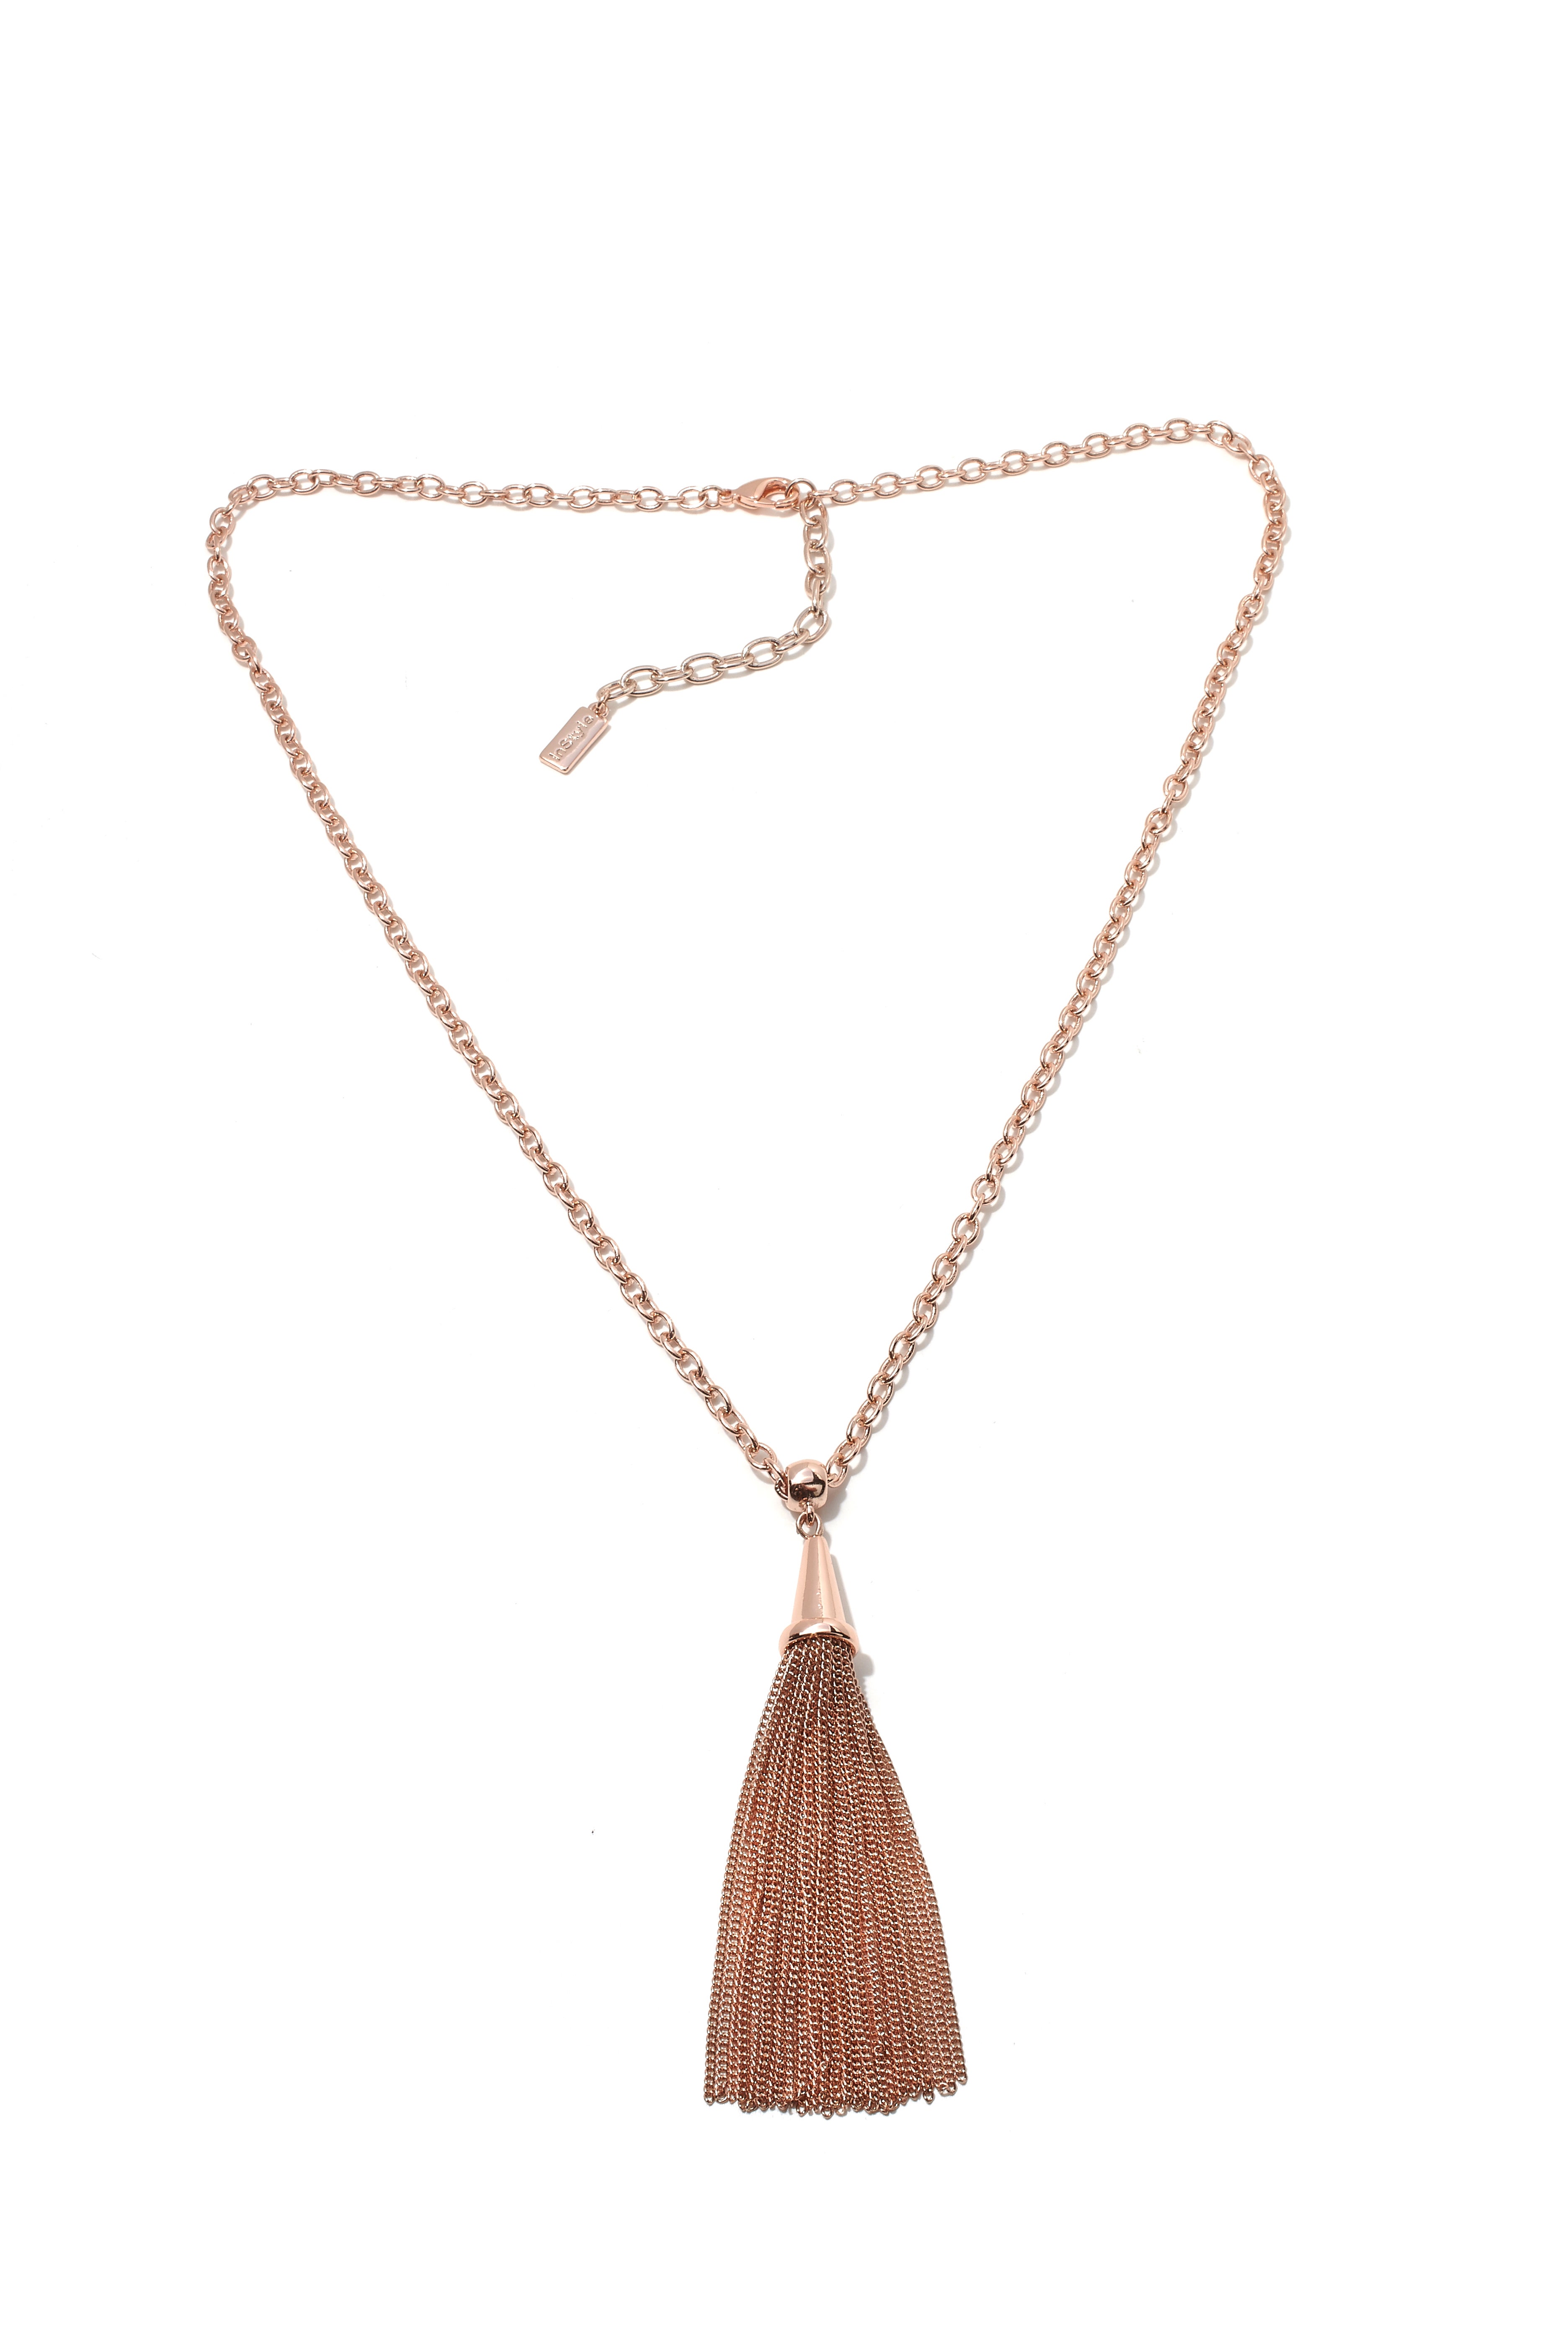 Things We Love From the Instyle x HSN Jewelry Collection